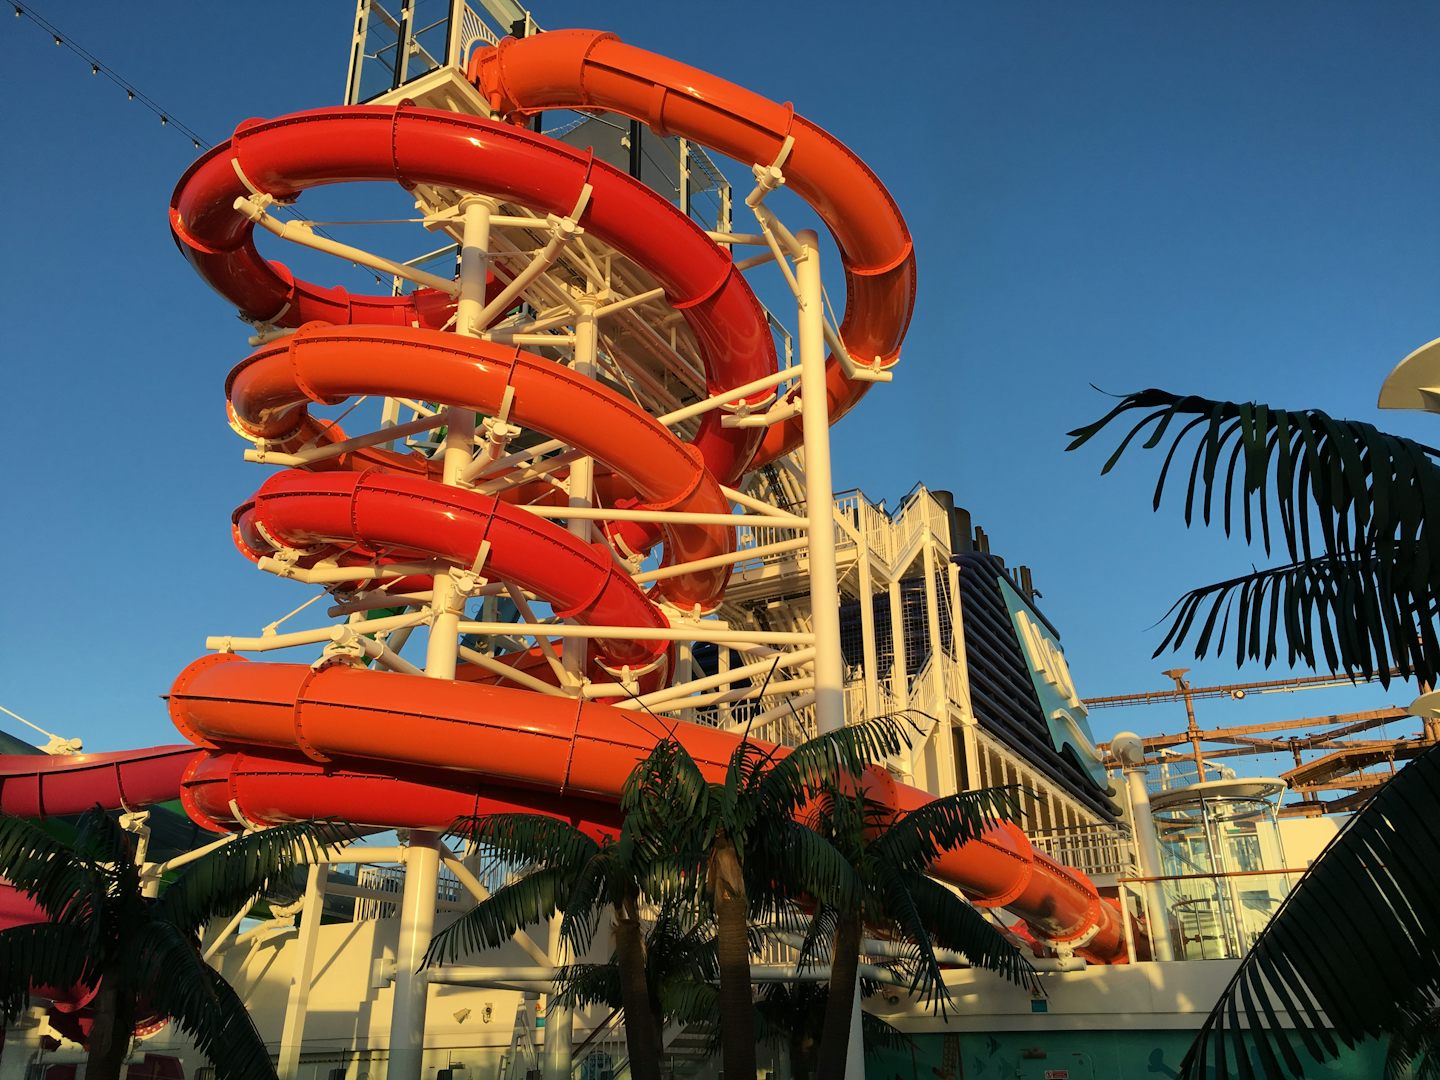 Another shot of the water slides in the light of the sunrise.